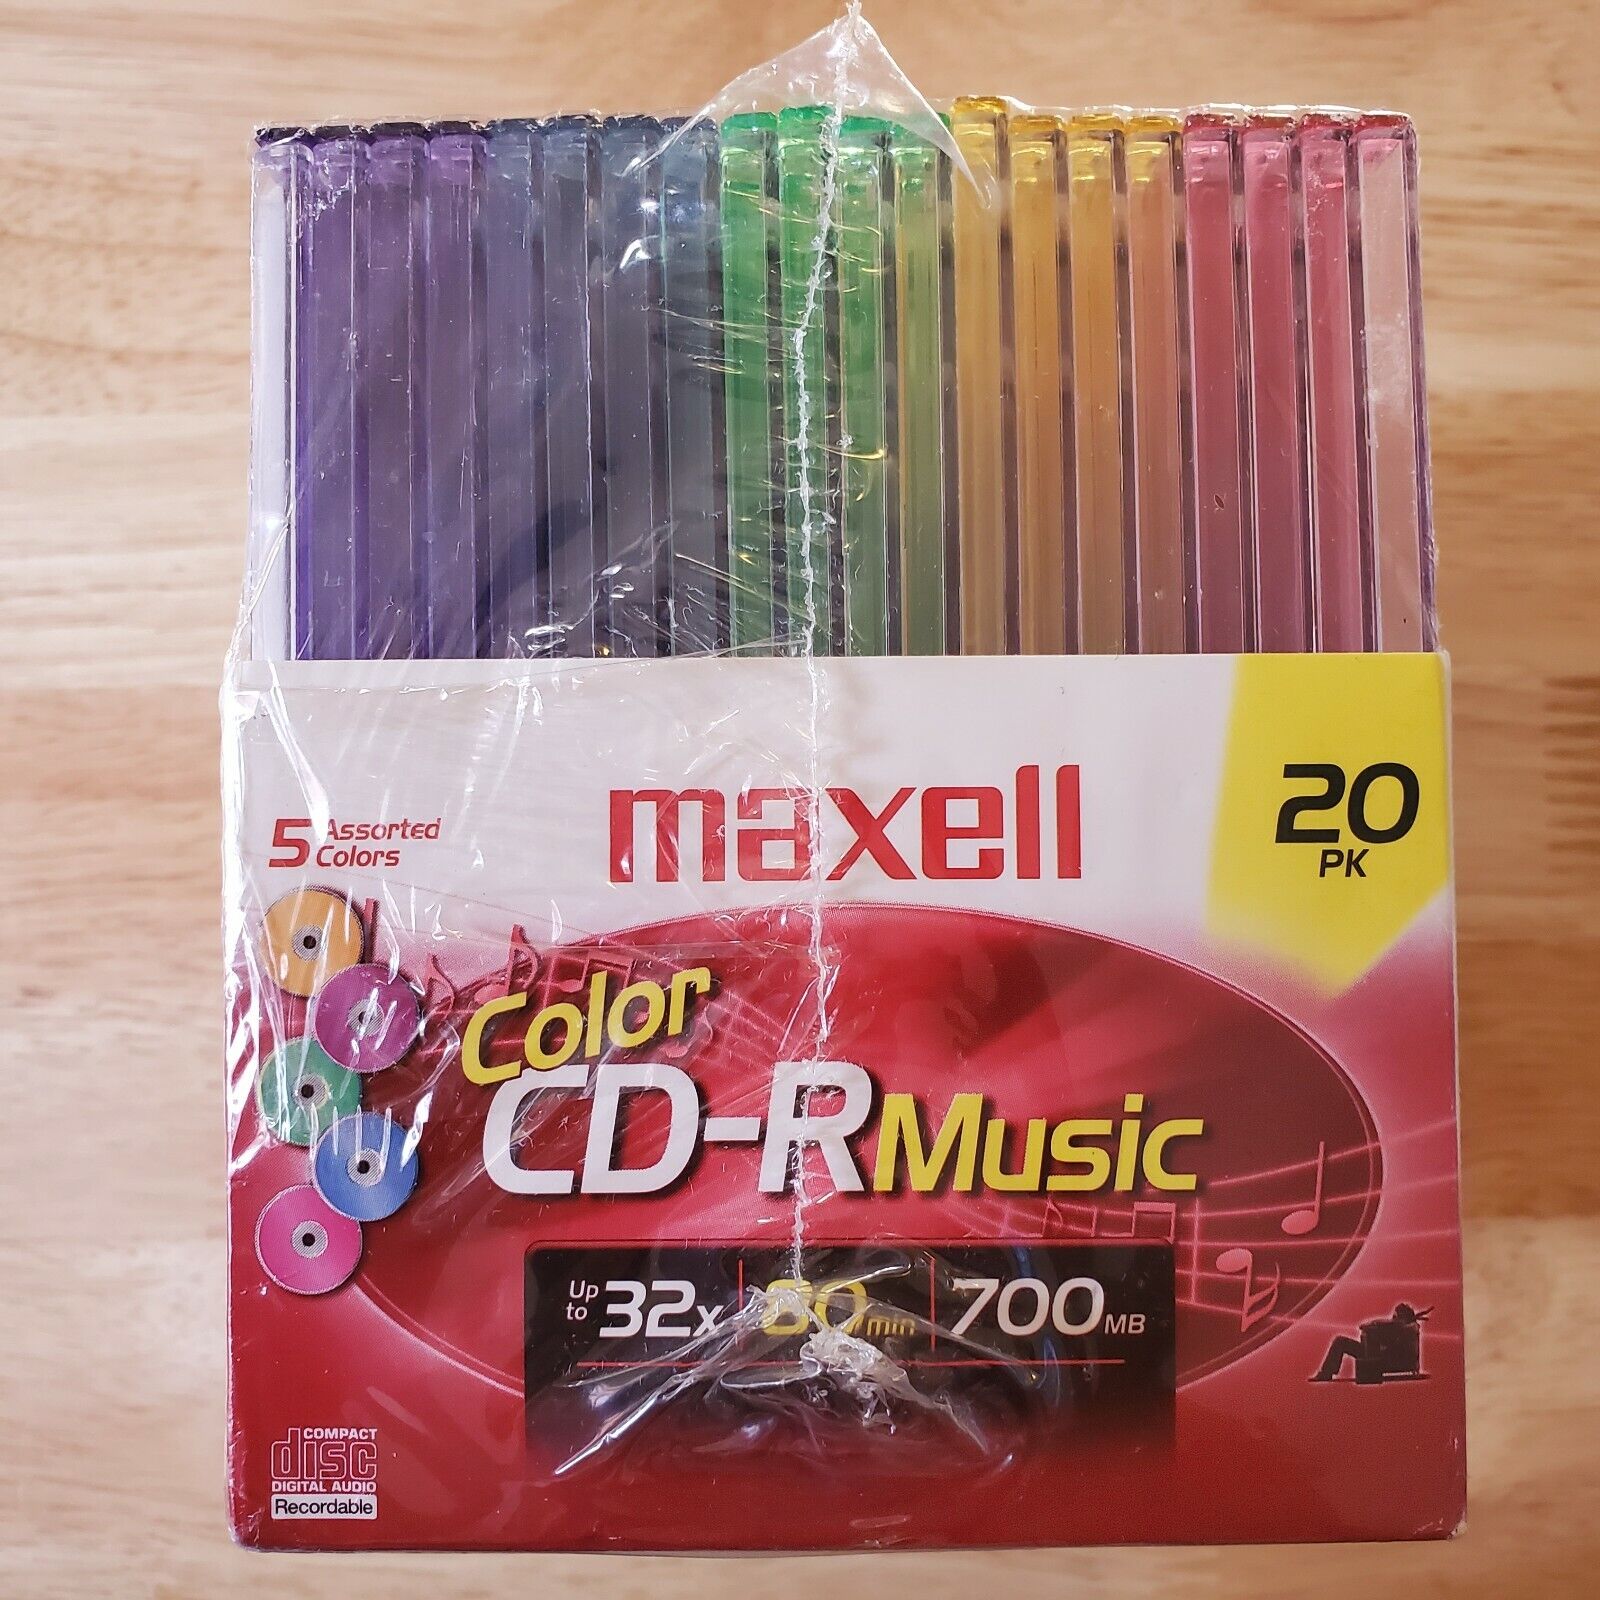 BRAND NEW MAXWELLCD-R Music 20 Bombing free NEW shipping Pack Compact w Disc Color Jewel